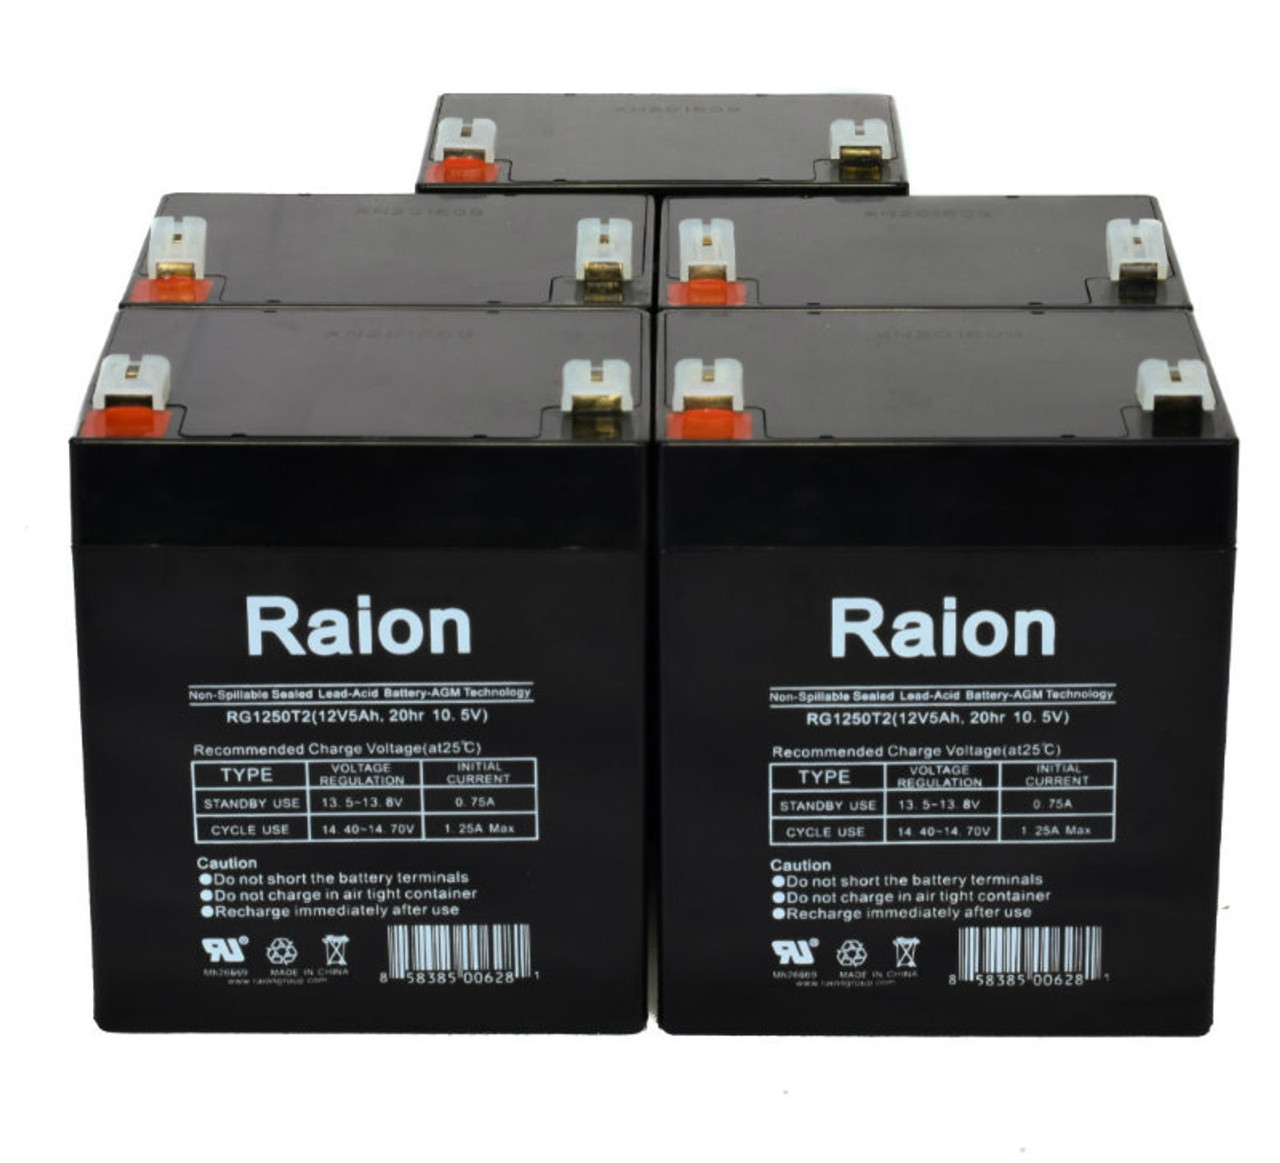 Raion Power 12V 5Ah RG1250T2 Replacement Lead Acid Battery for B&B Battery HR5.8-12-F1 - 5 Pack